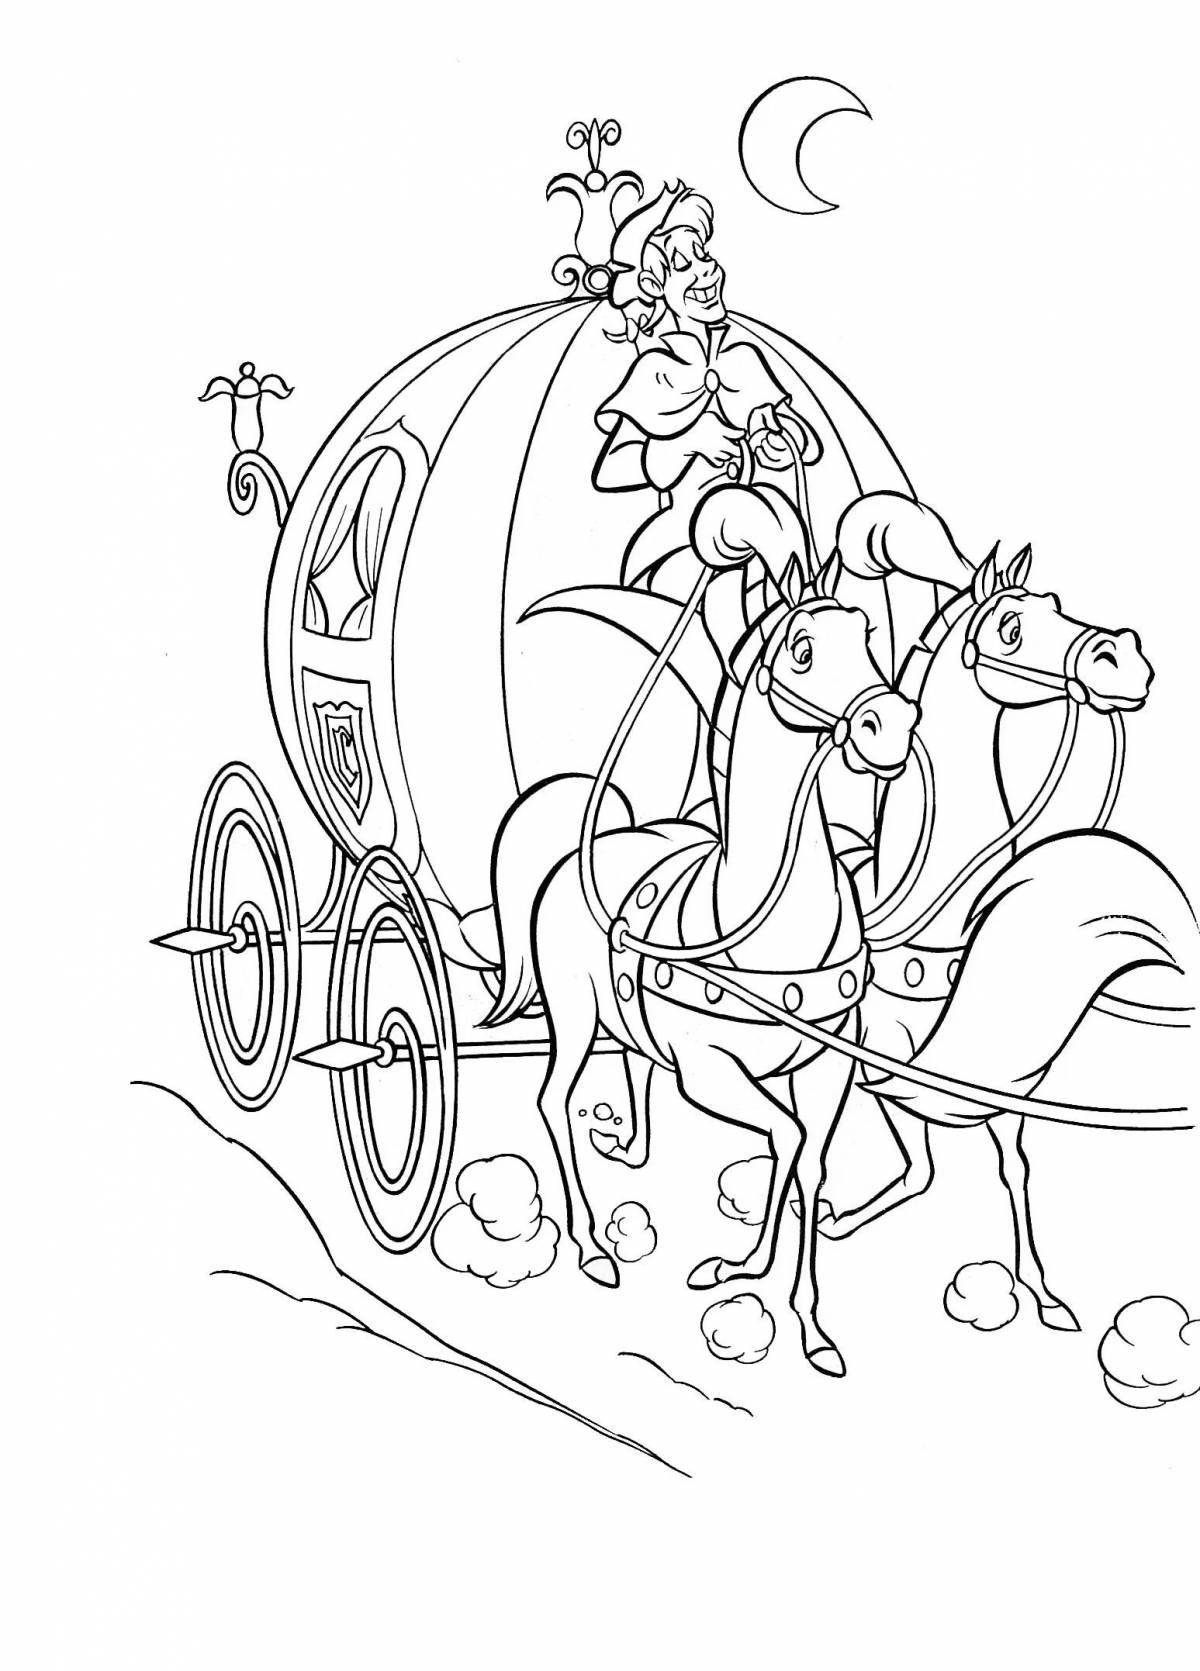 Coloring page decorative princess in a carriage